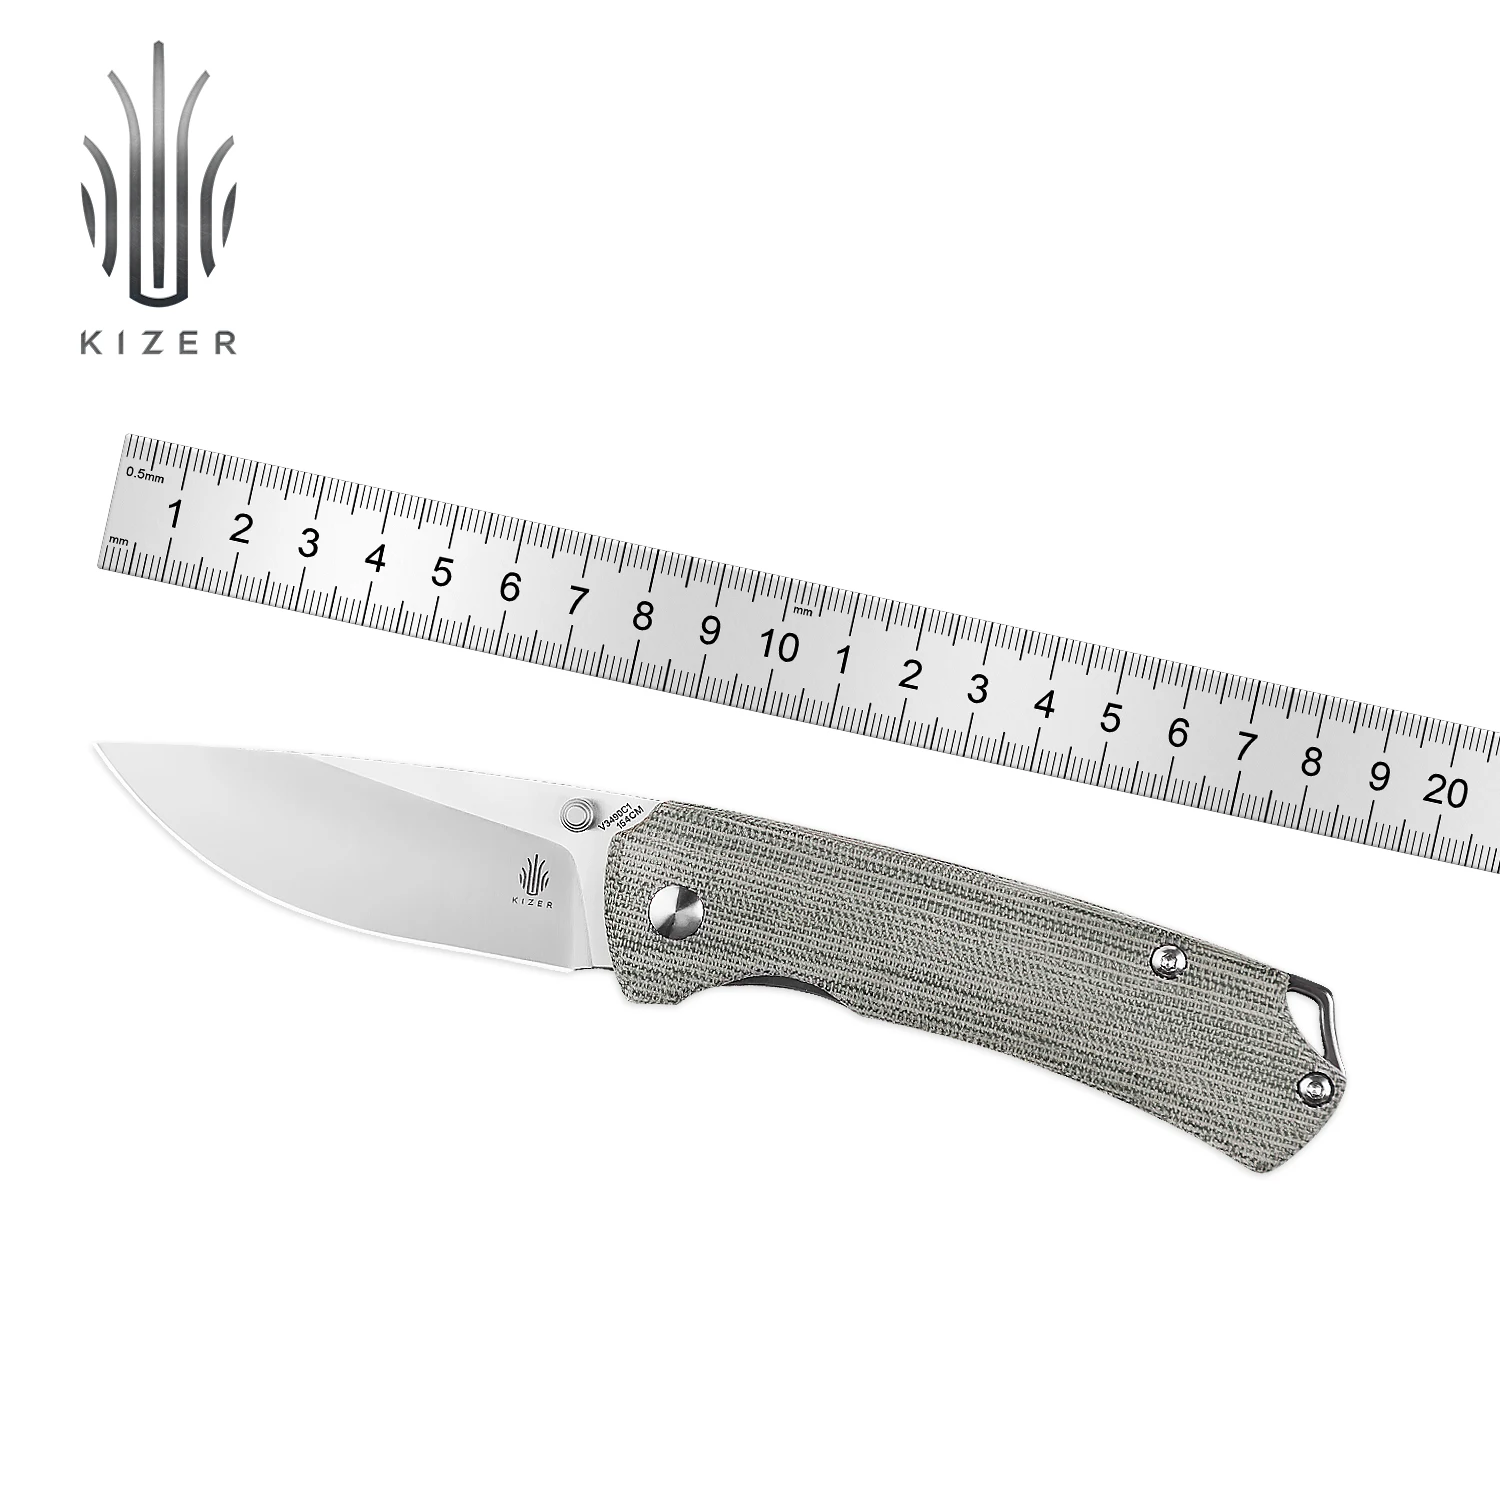 Kizer Tactical Knife T1 V3490C1 2022 New Green Micarta Handle with 154CM Steel Blade Pocket Knives with Thumb Stud